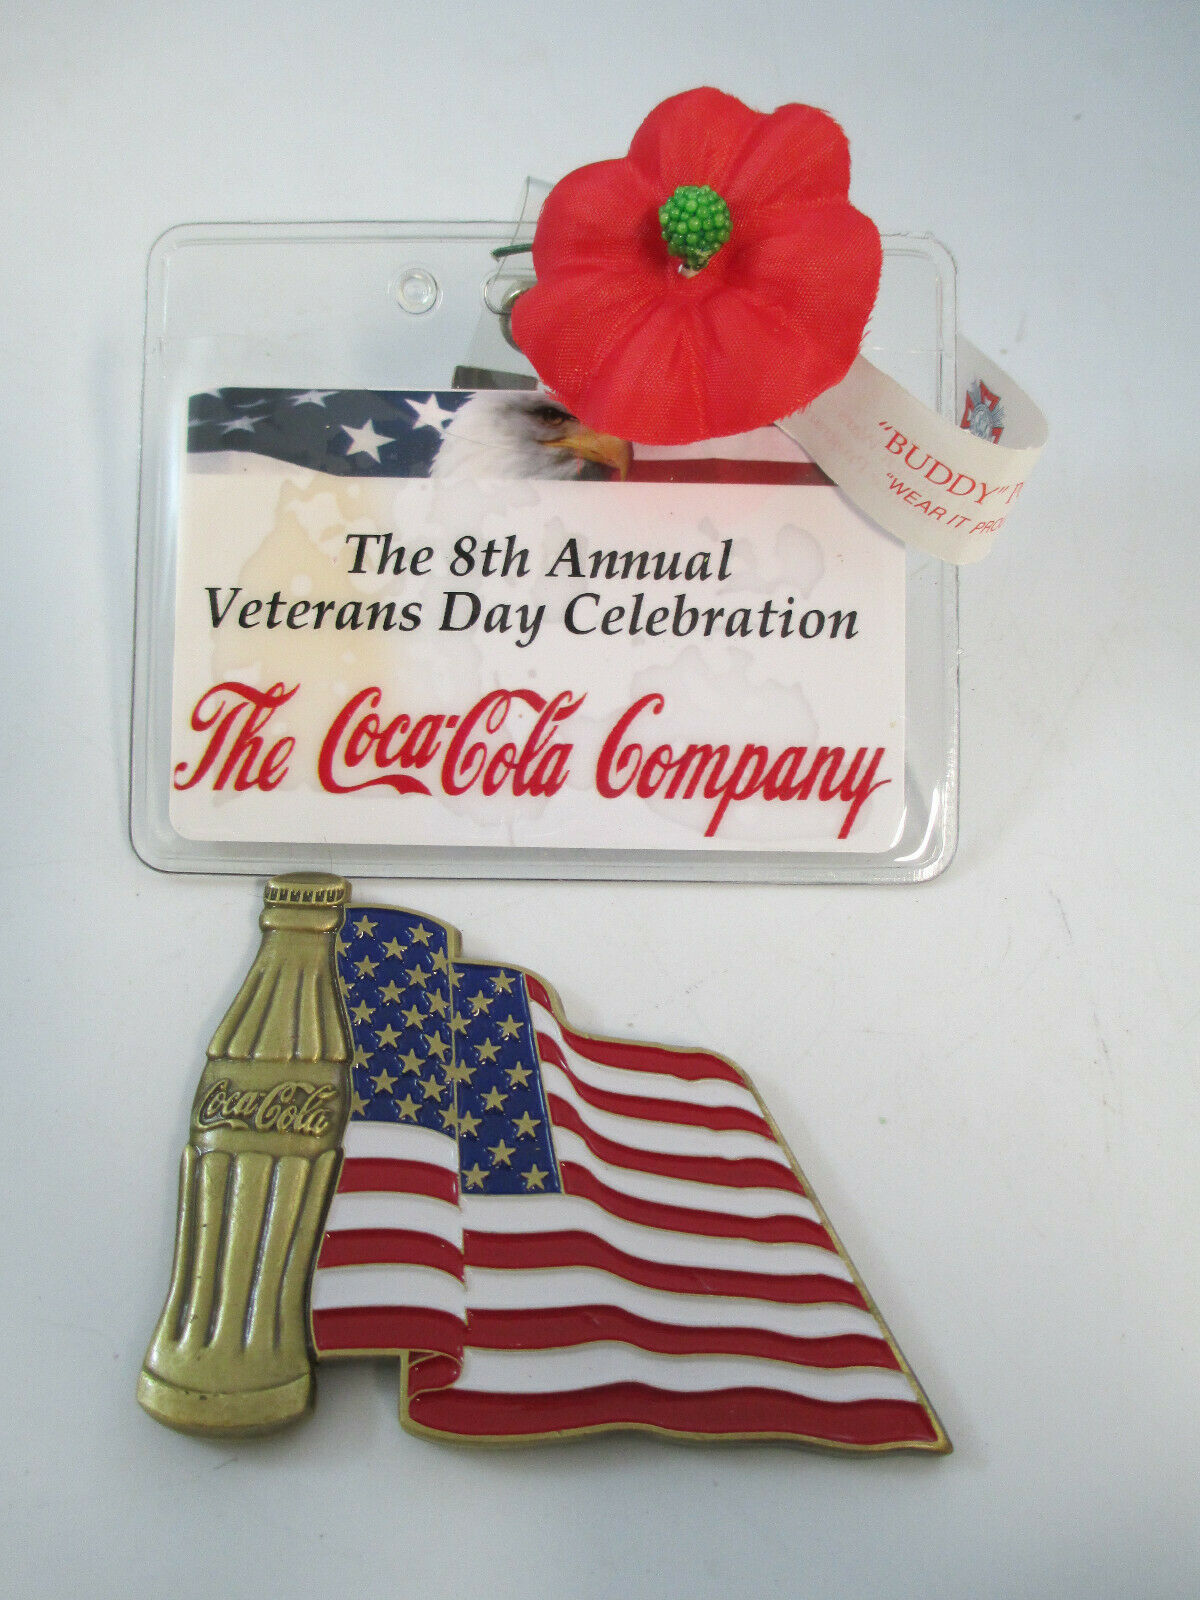 Coca-Cola Company Veteran's Day 2007 Challenge Coin with Poppy and Event Tag - $35.64